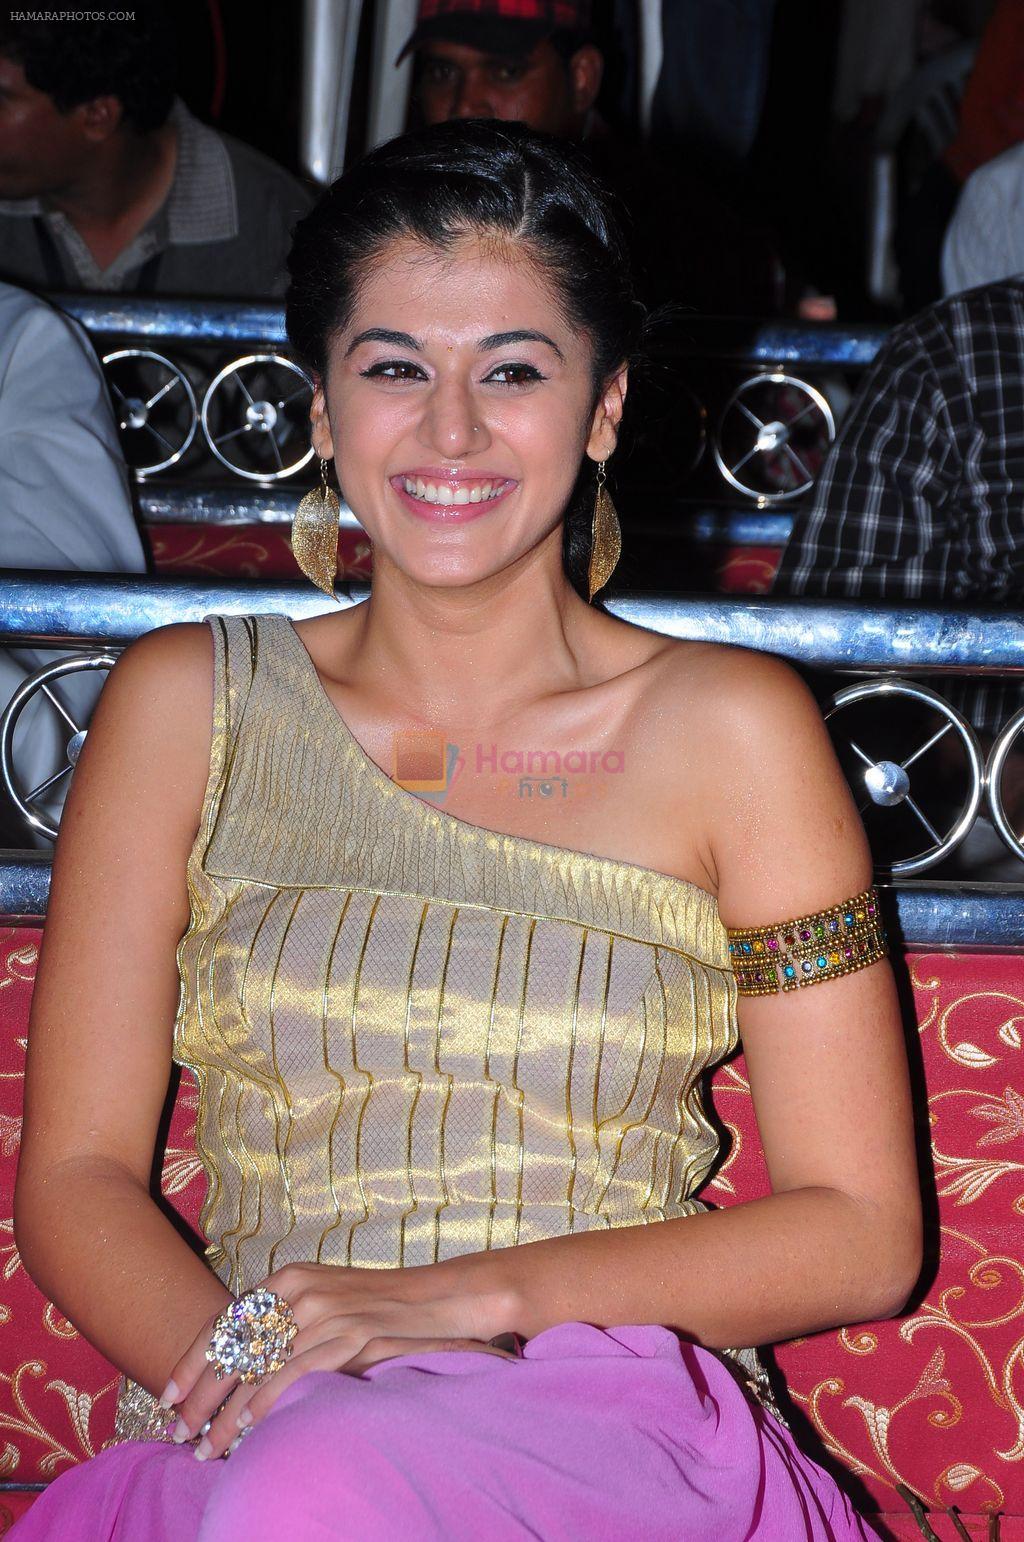 Tapasee Pannu attends Mogudu Movie Audio Launch on 11th October 2011